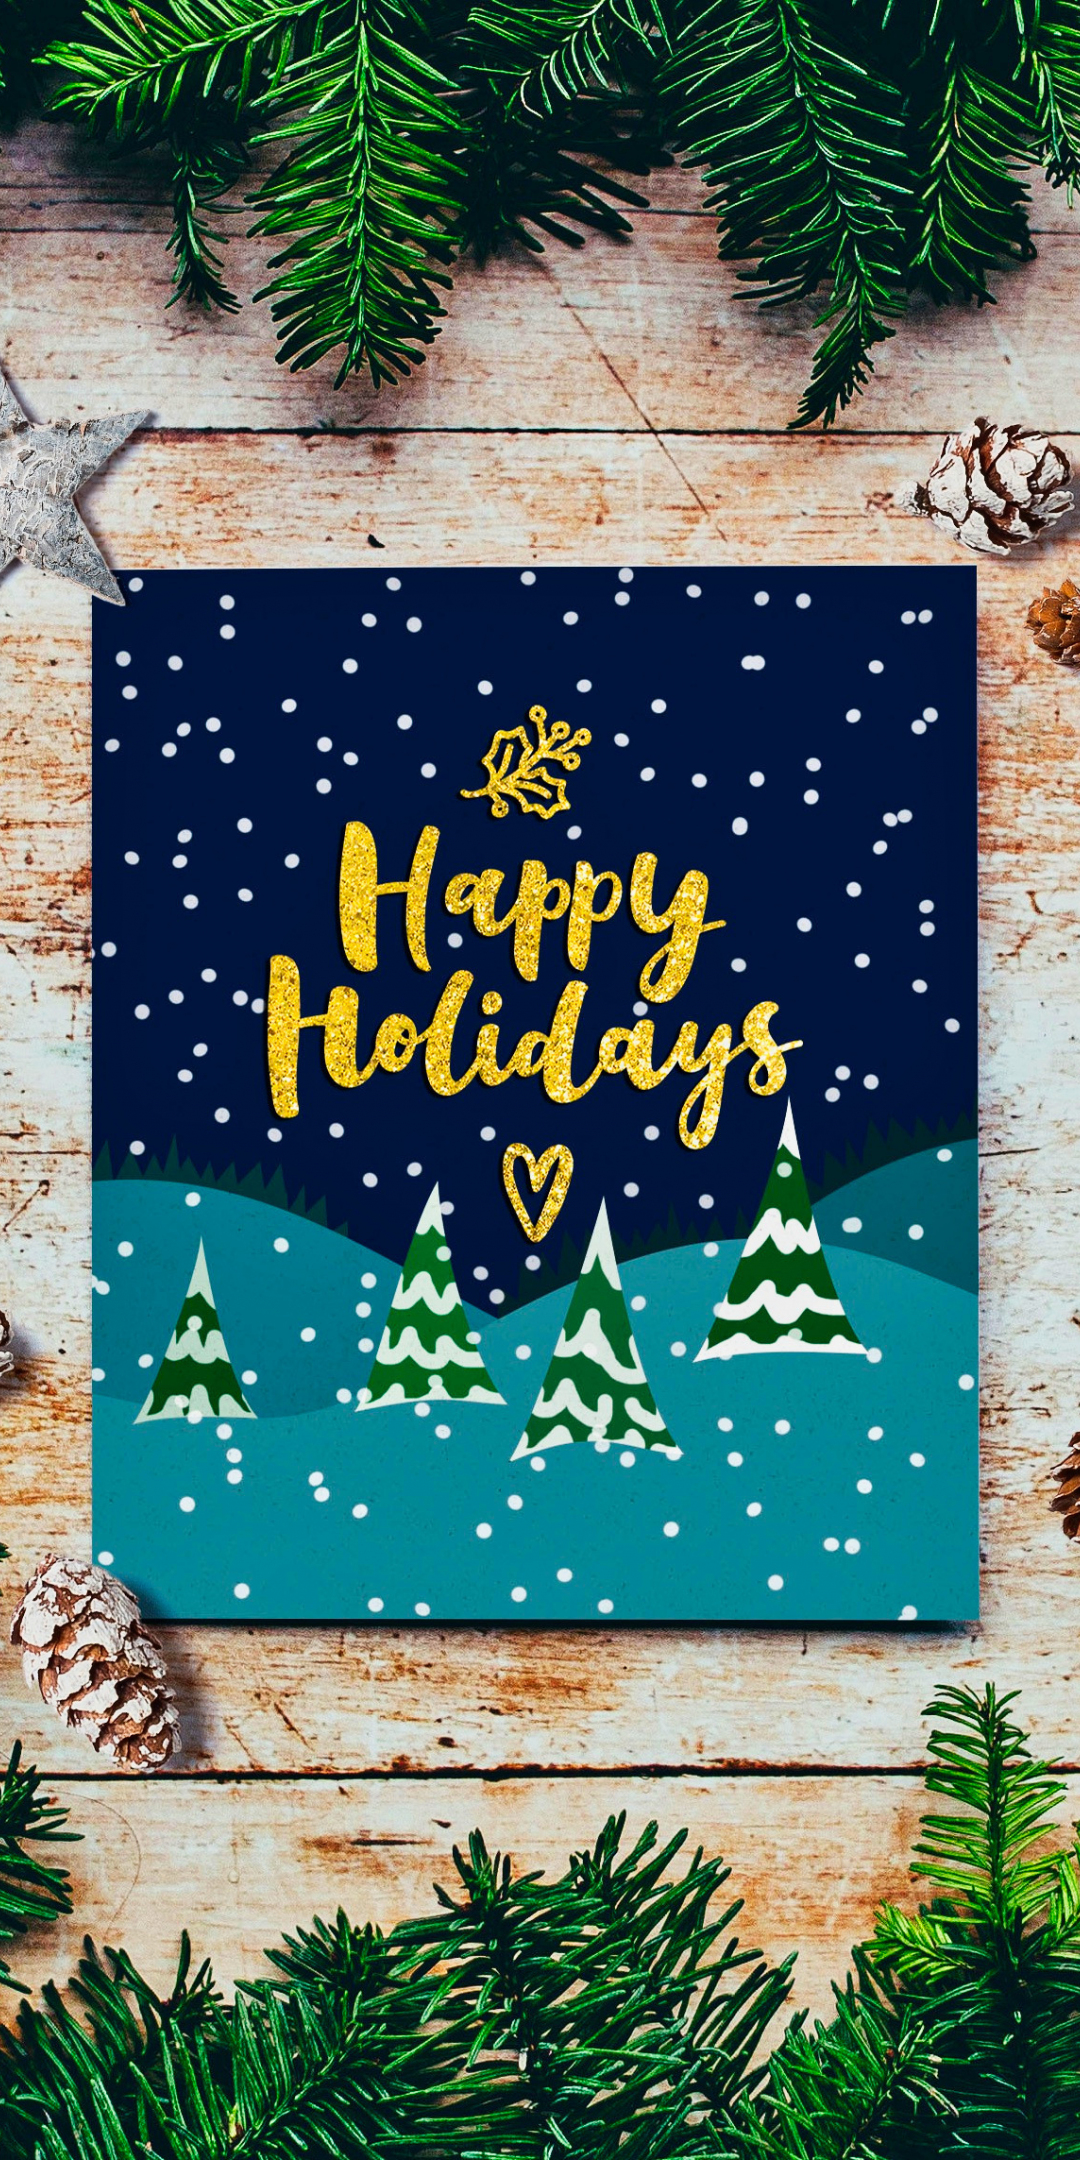 Happy holidays, Merry Christmas, Happy New Year, 2020, greetings card, 1080x2160 wallpaper